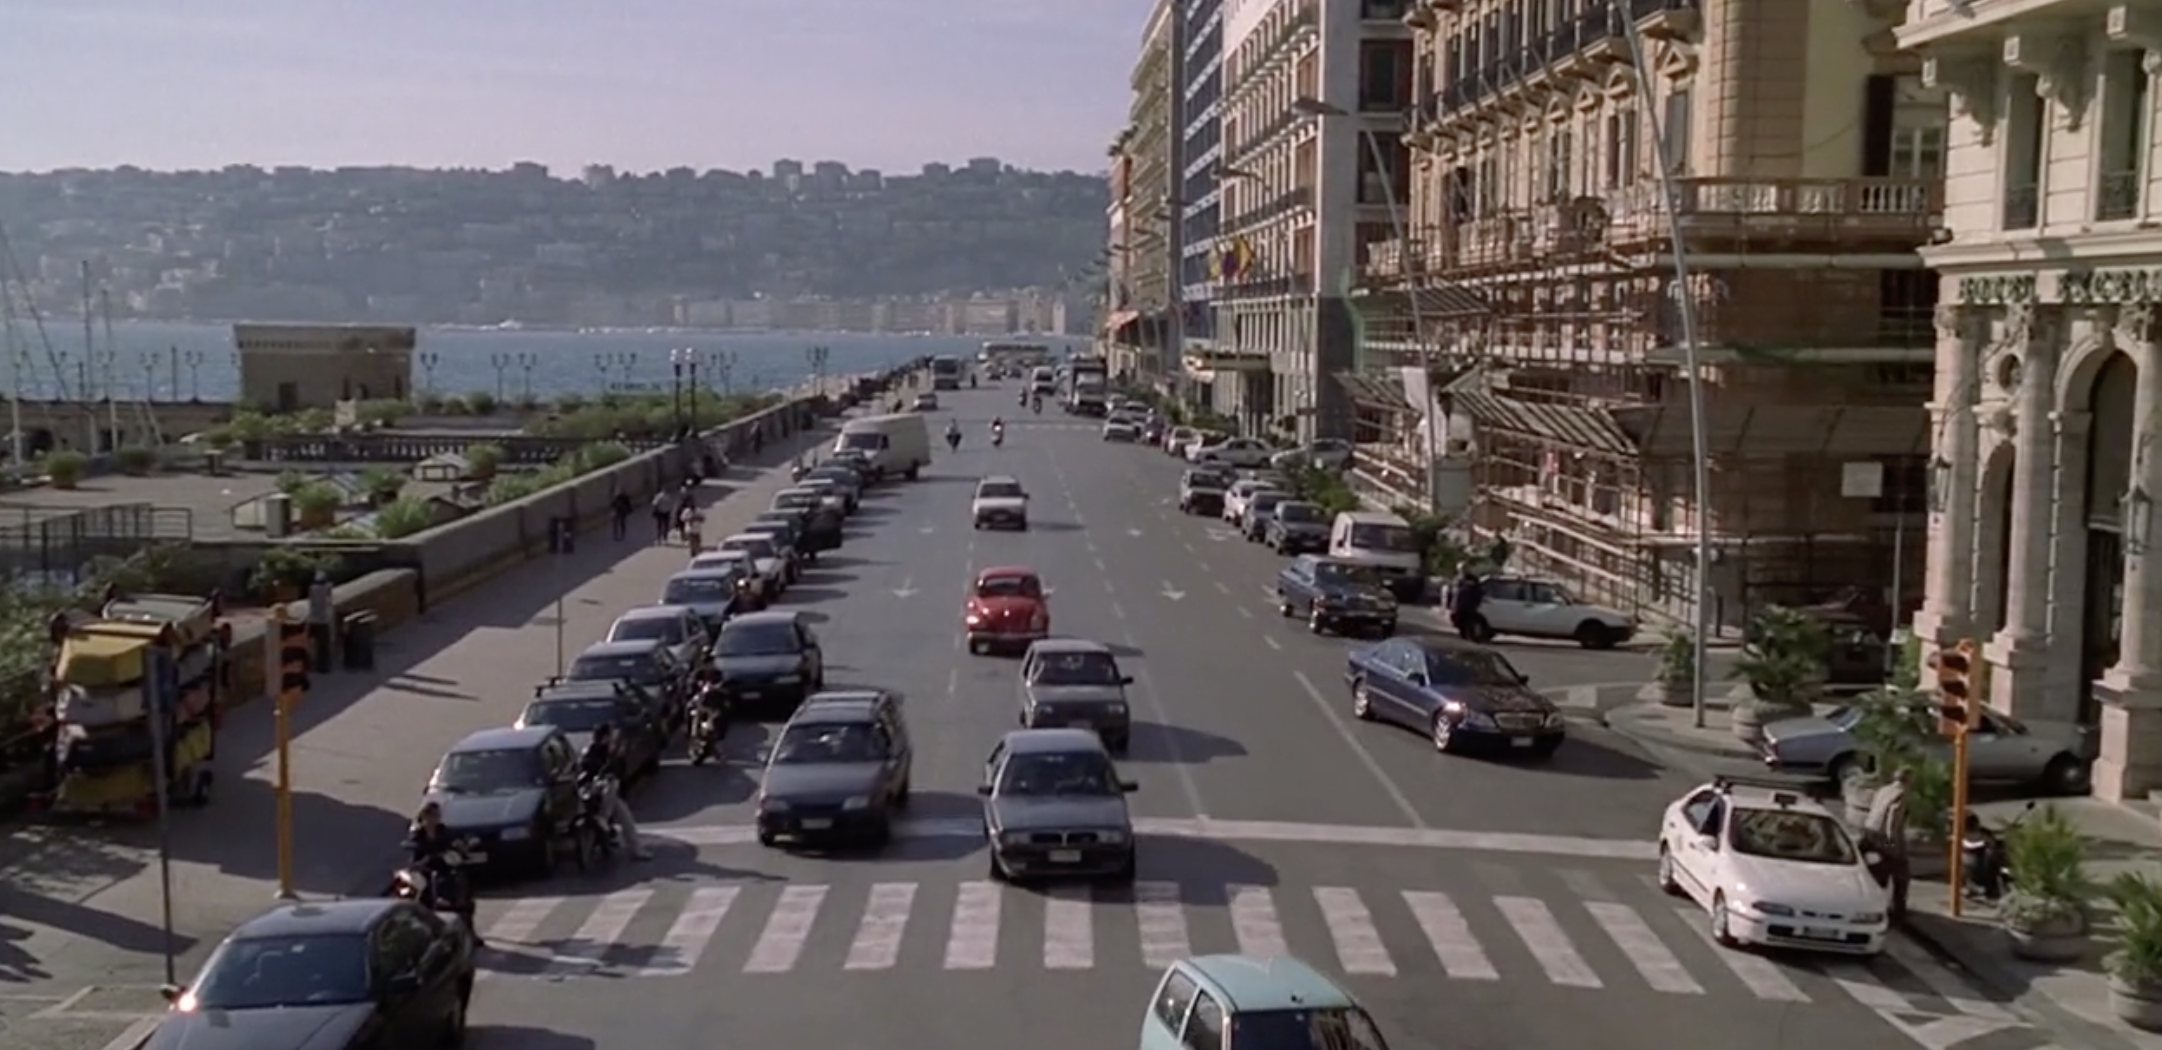 Image credit to HBO/Entertainment. Image of Hotel Excelsior road from outside